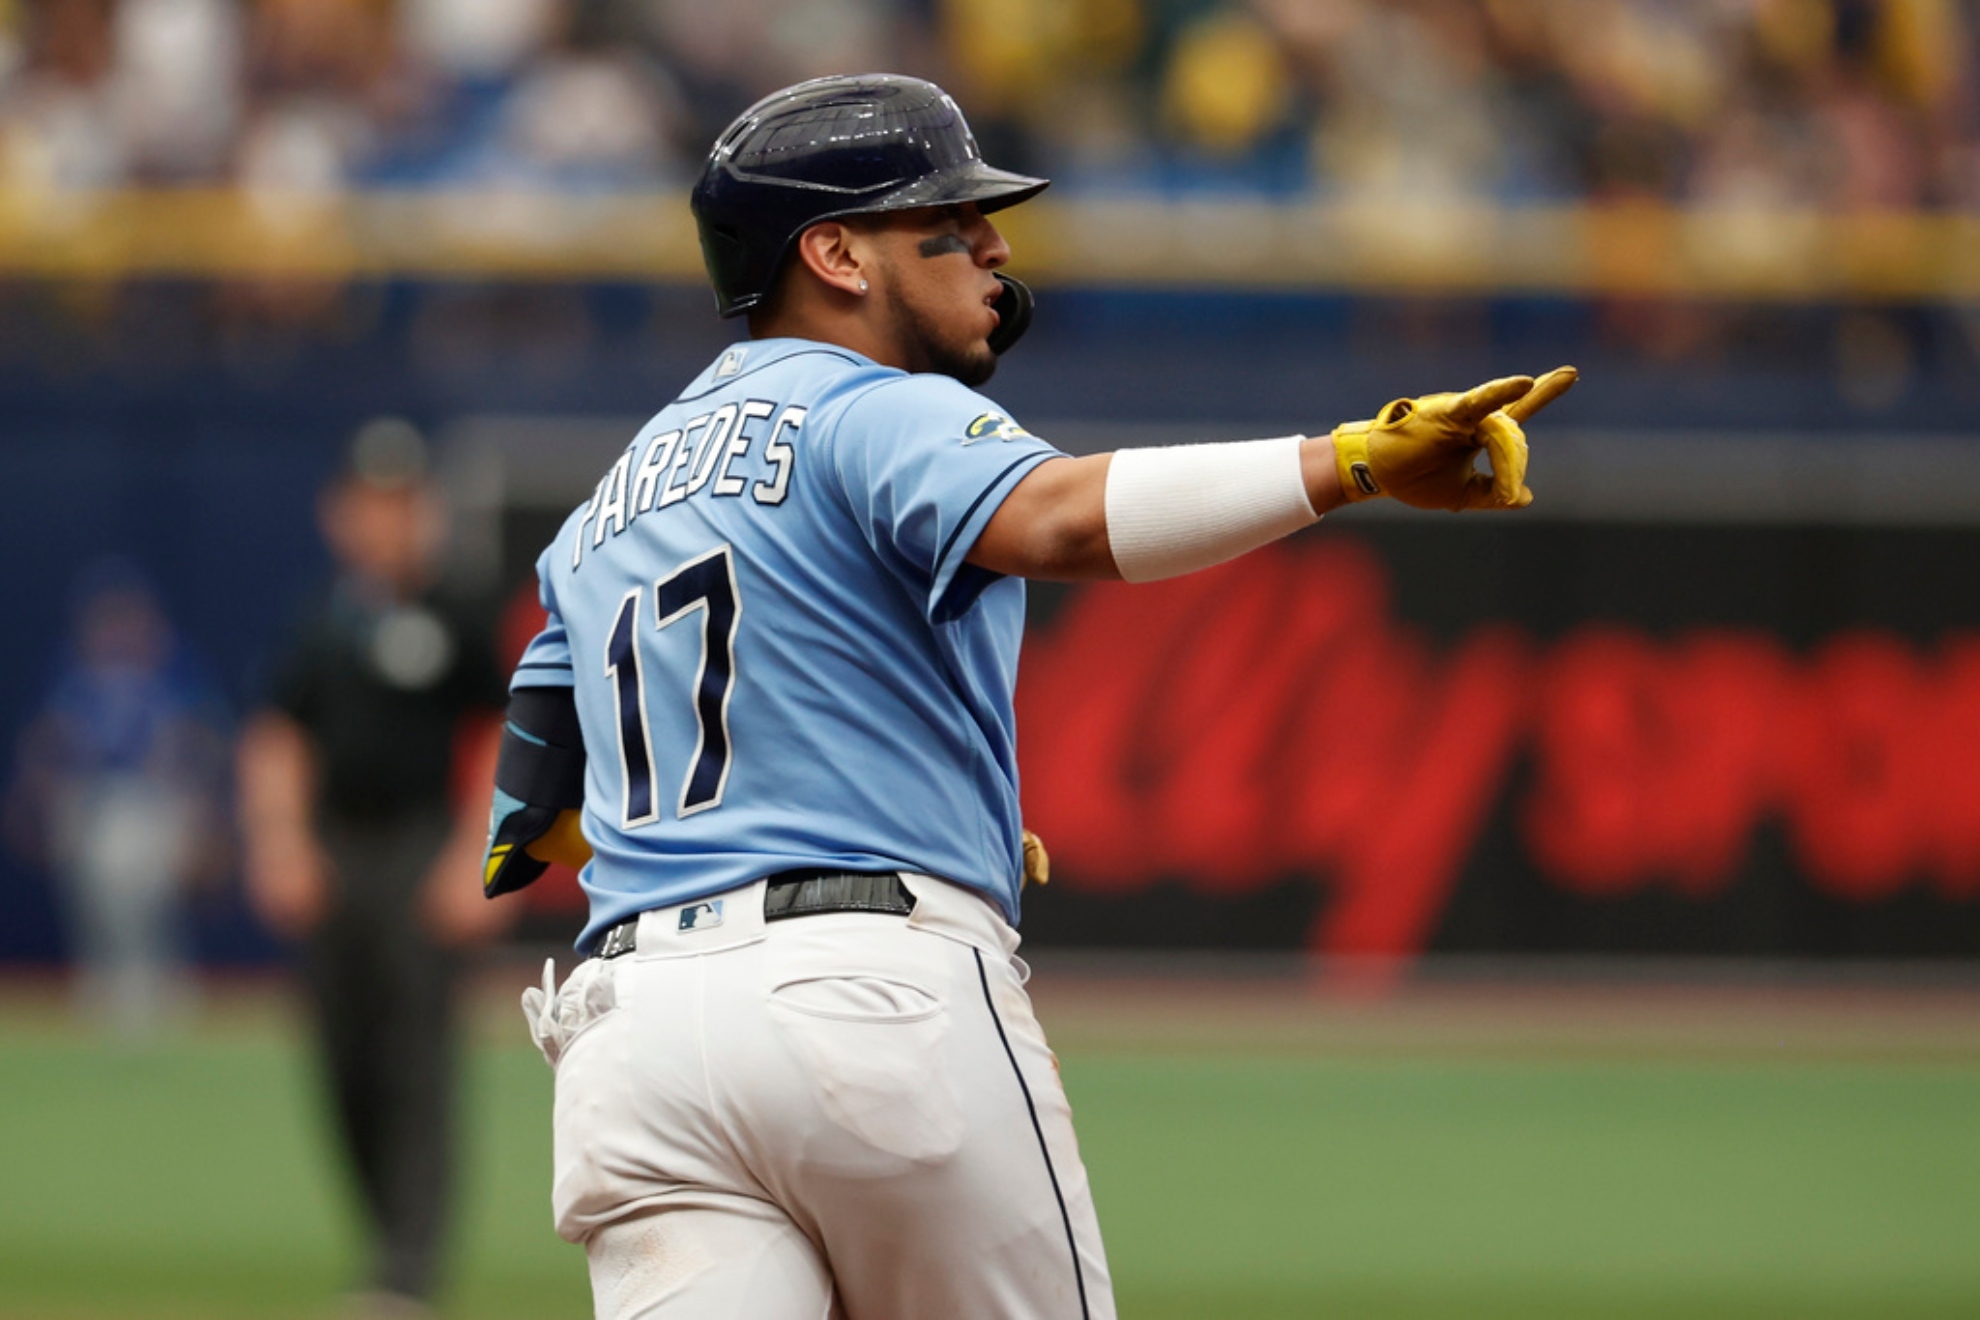 Rays' Isaac Paredes breaks home run record hitting his 30th of the season amid Arozarena injury